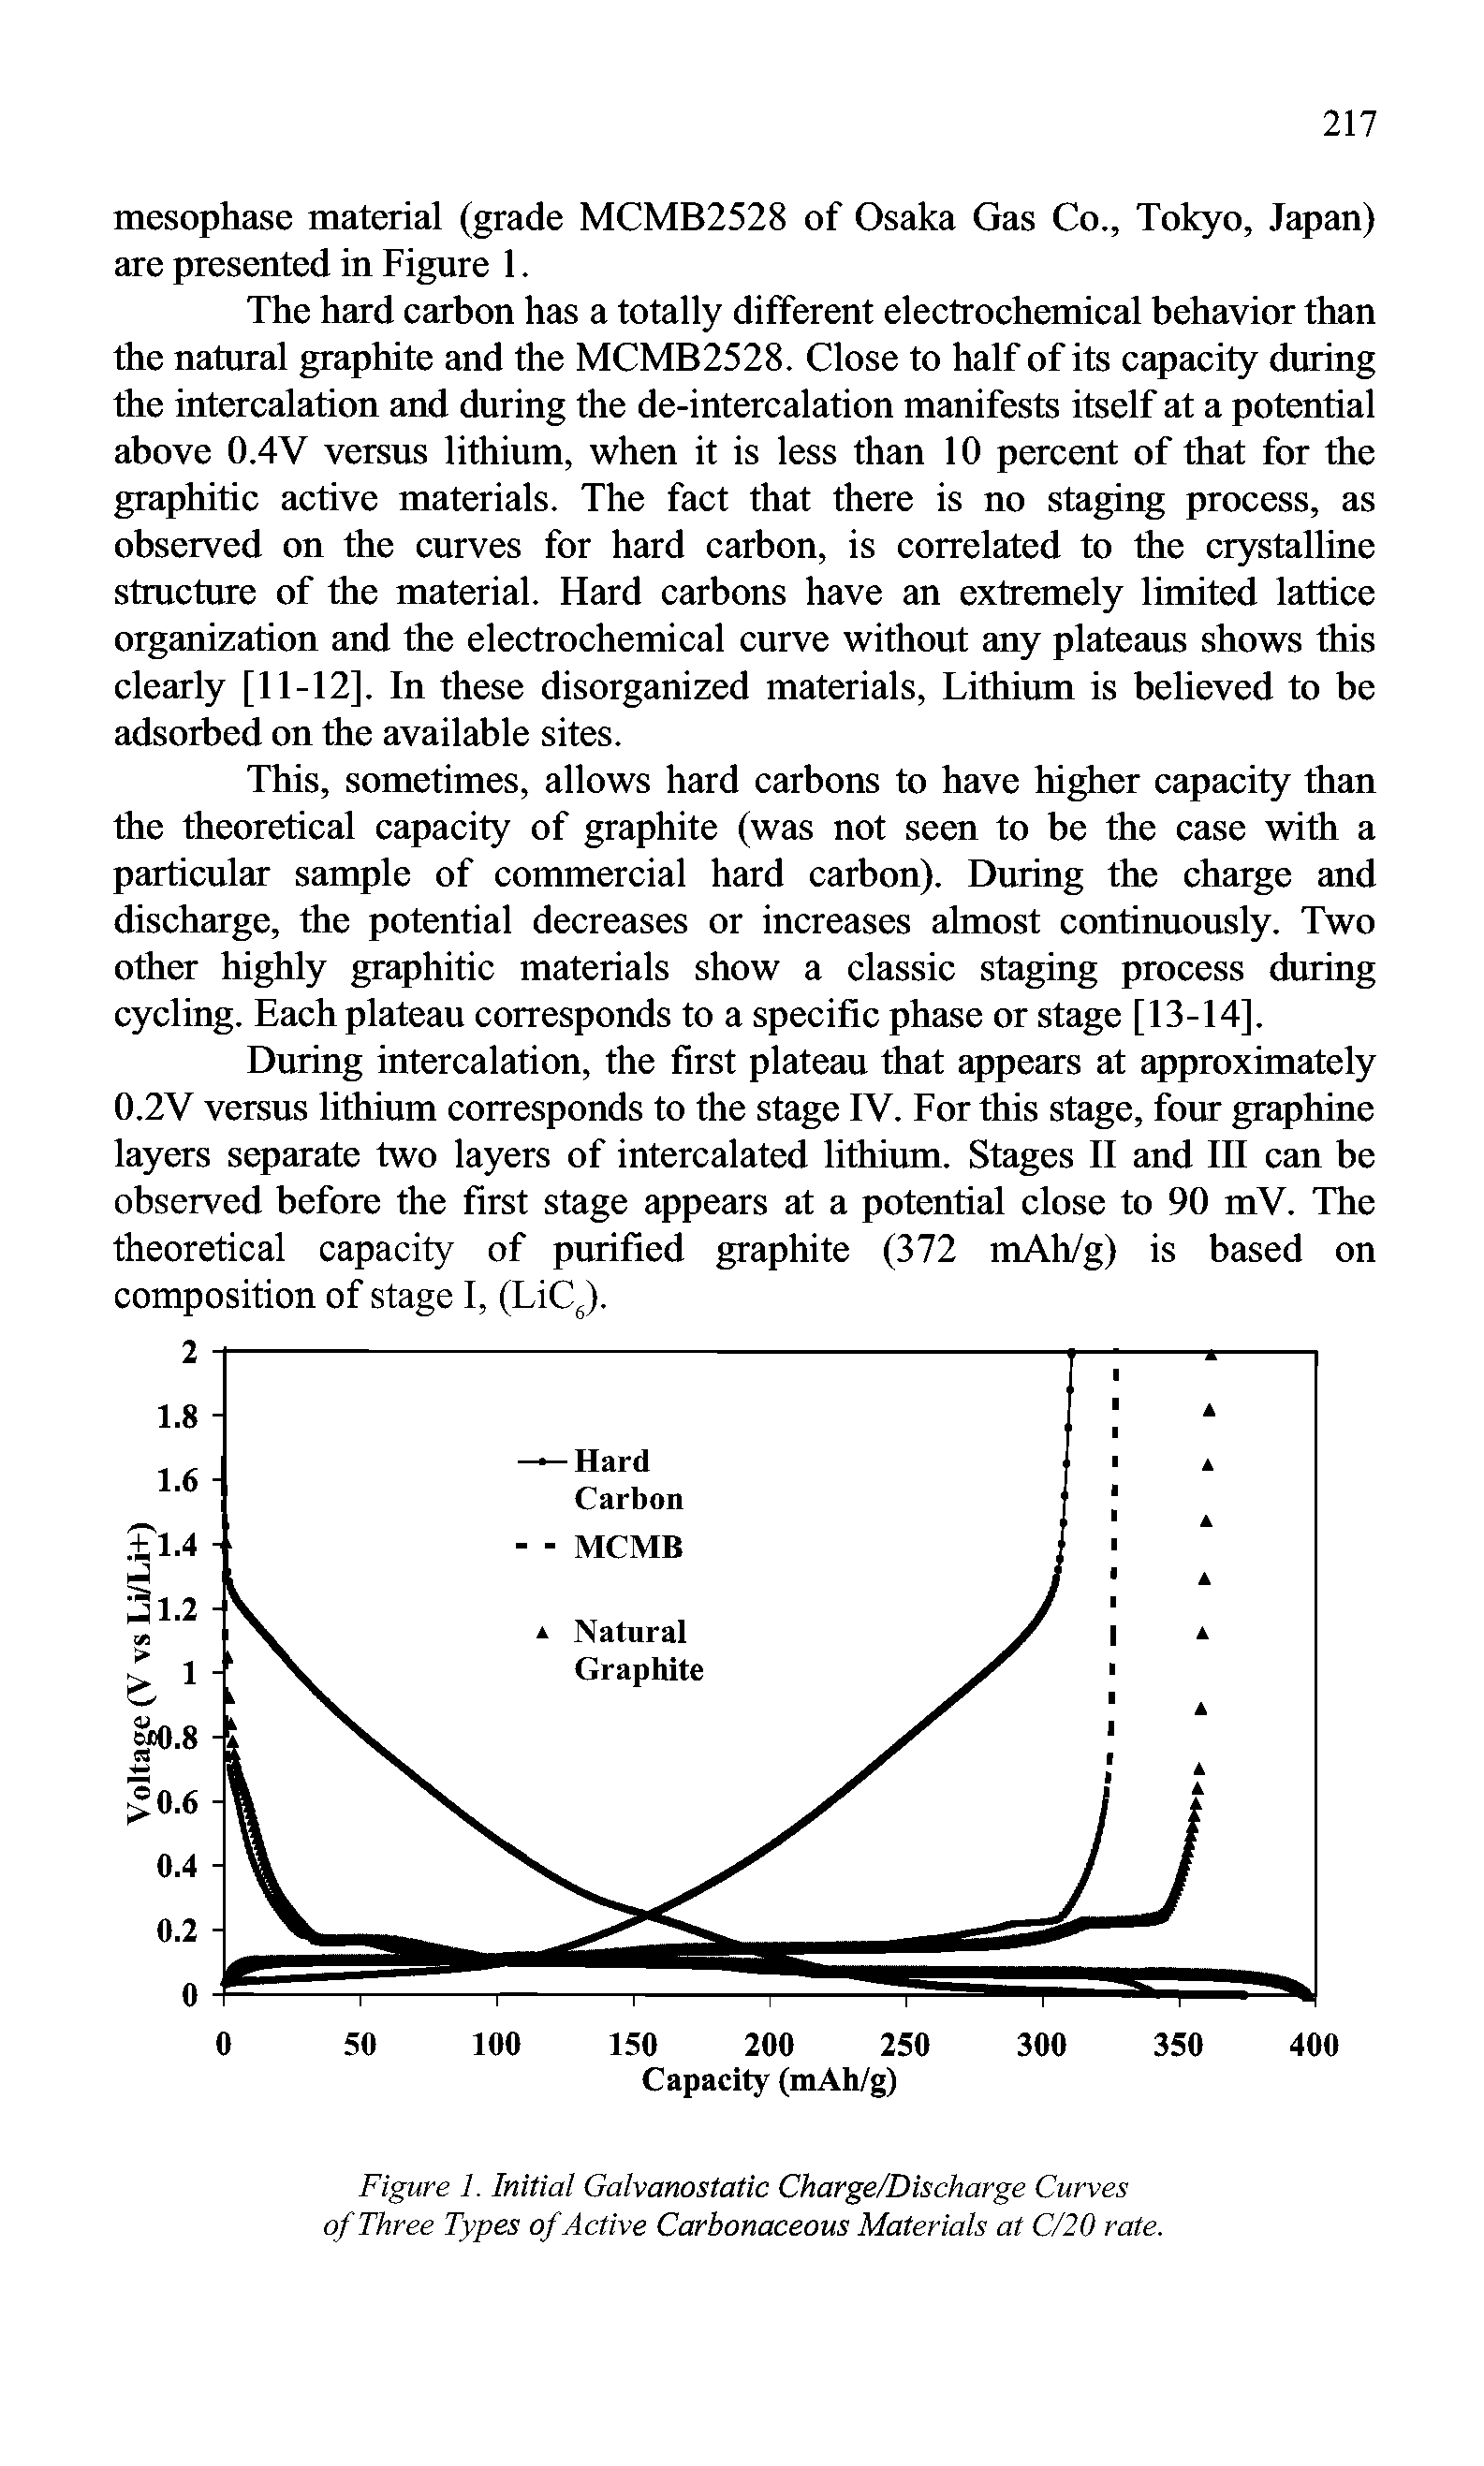 Figure 1. Initial Galvanostatic Charge/Discharge Curves of Three Types of Active Carbonaceous Materials at C/20 rate.